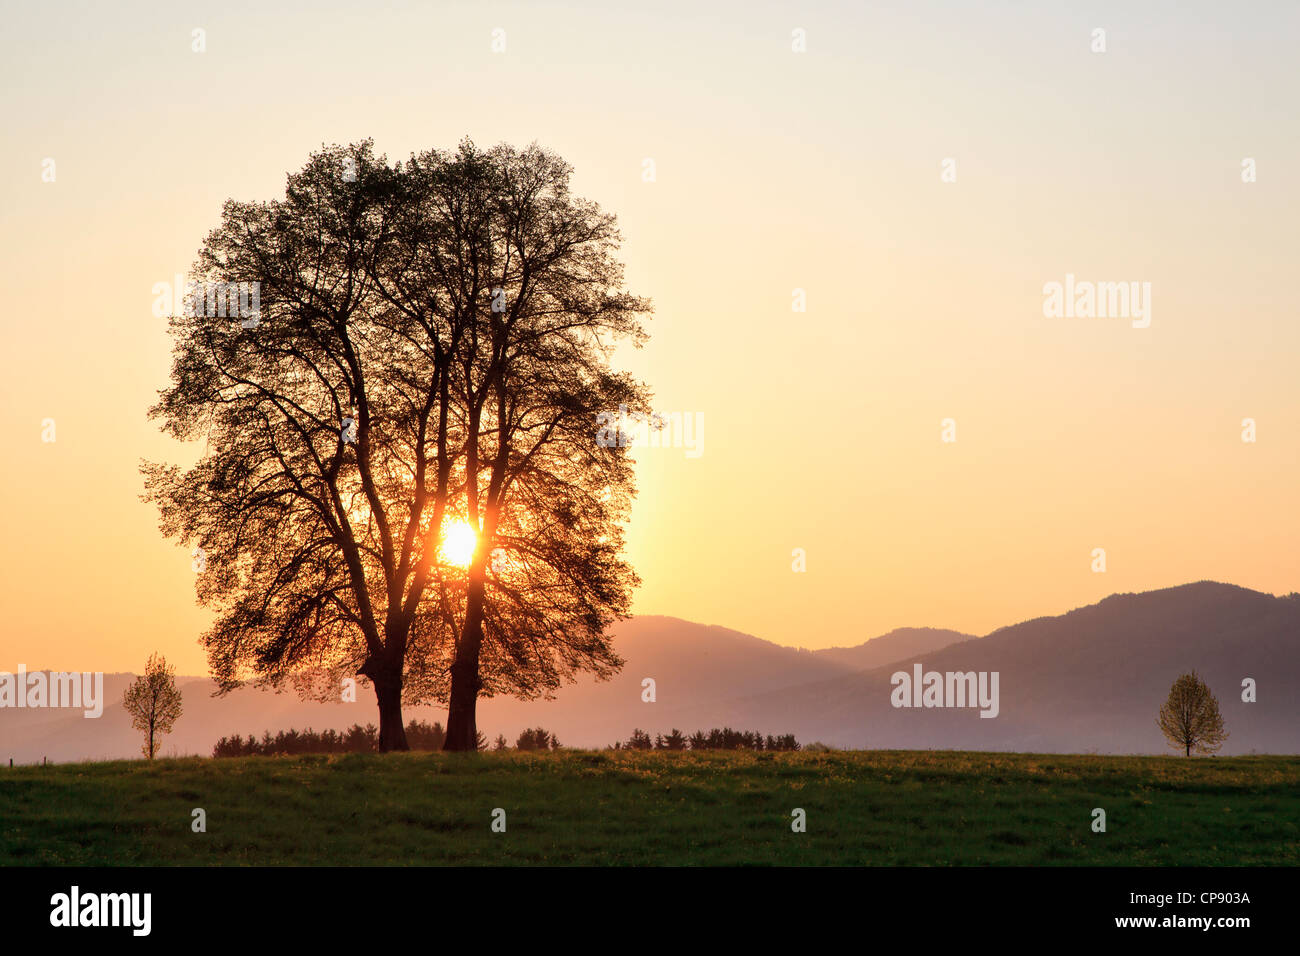 Germany, Bavaria, View of broad leaved tree at sunrise Stock Photo